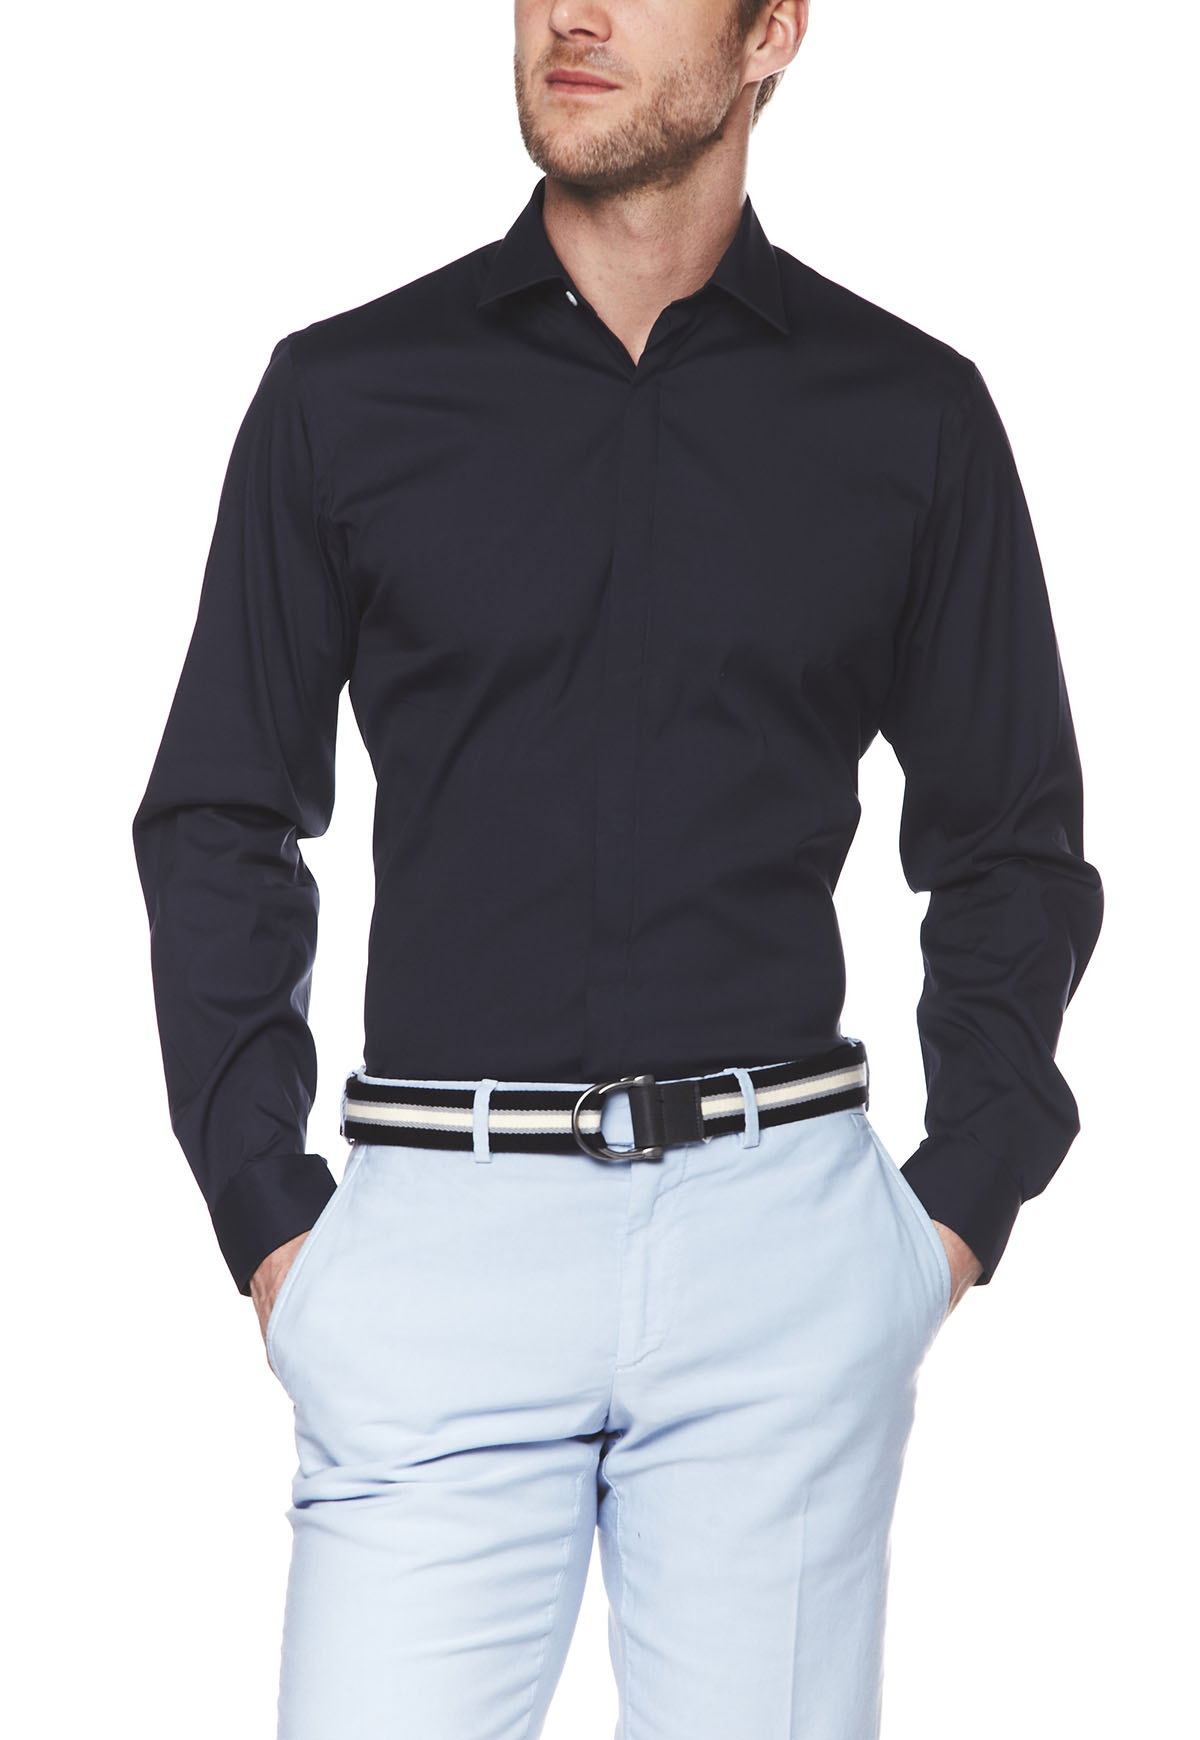 chemise-homme-manches-longues-coupe-extra-ajustee-antoine-popeline-bleu-marine-fonce-uni-coton-stretch-face-alain-figaret-an6642306864.jpg